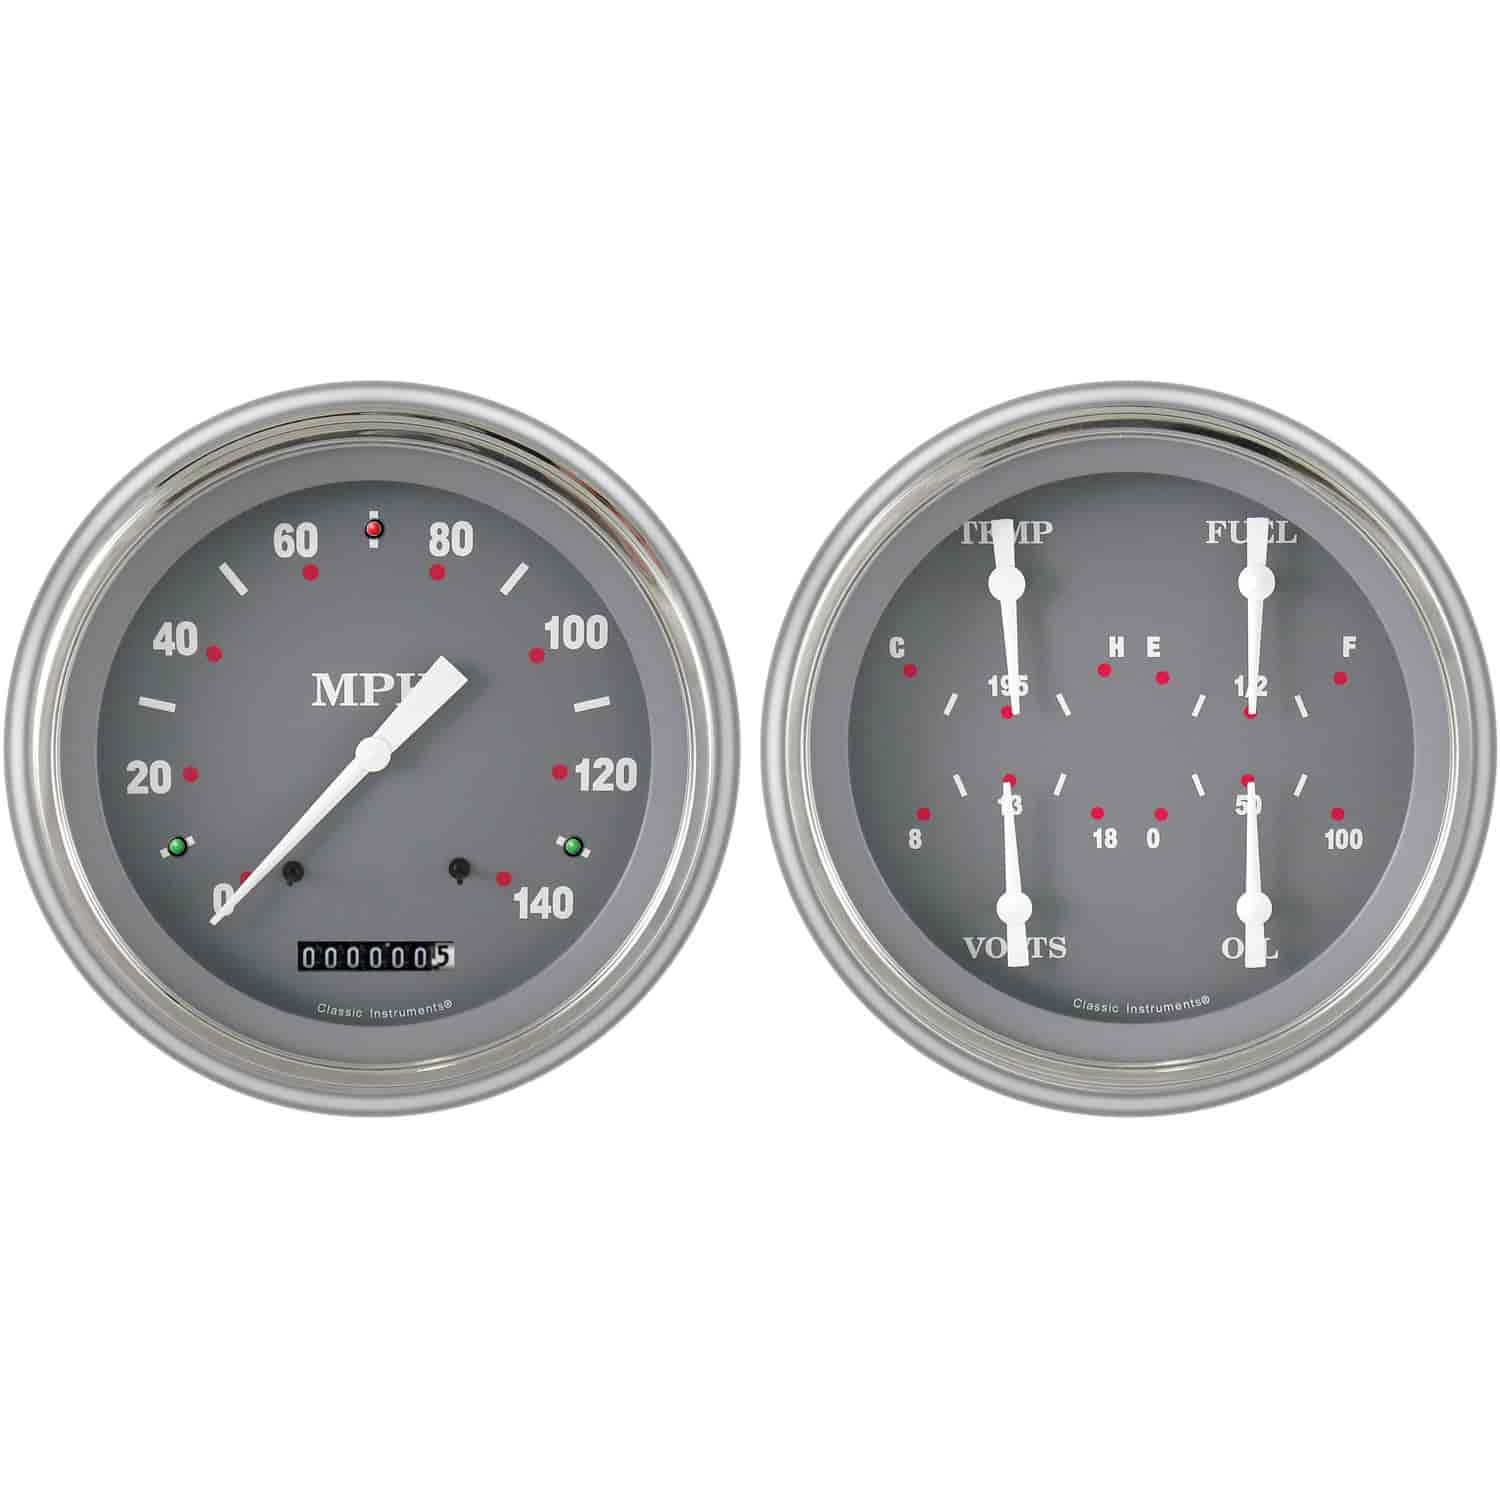 SG Series Gauge Package 1951-52 Chevy Car Includes: